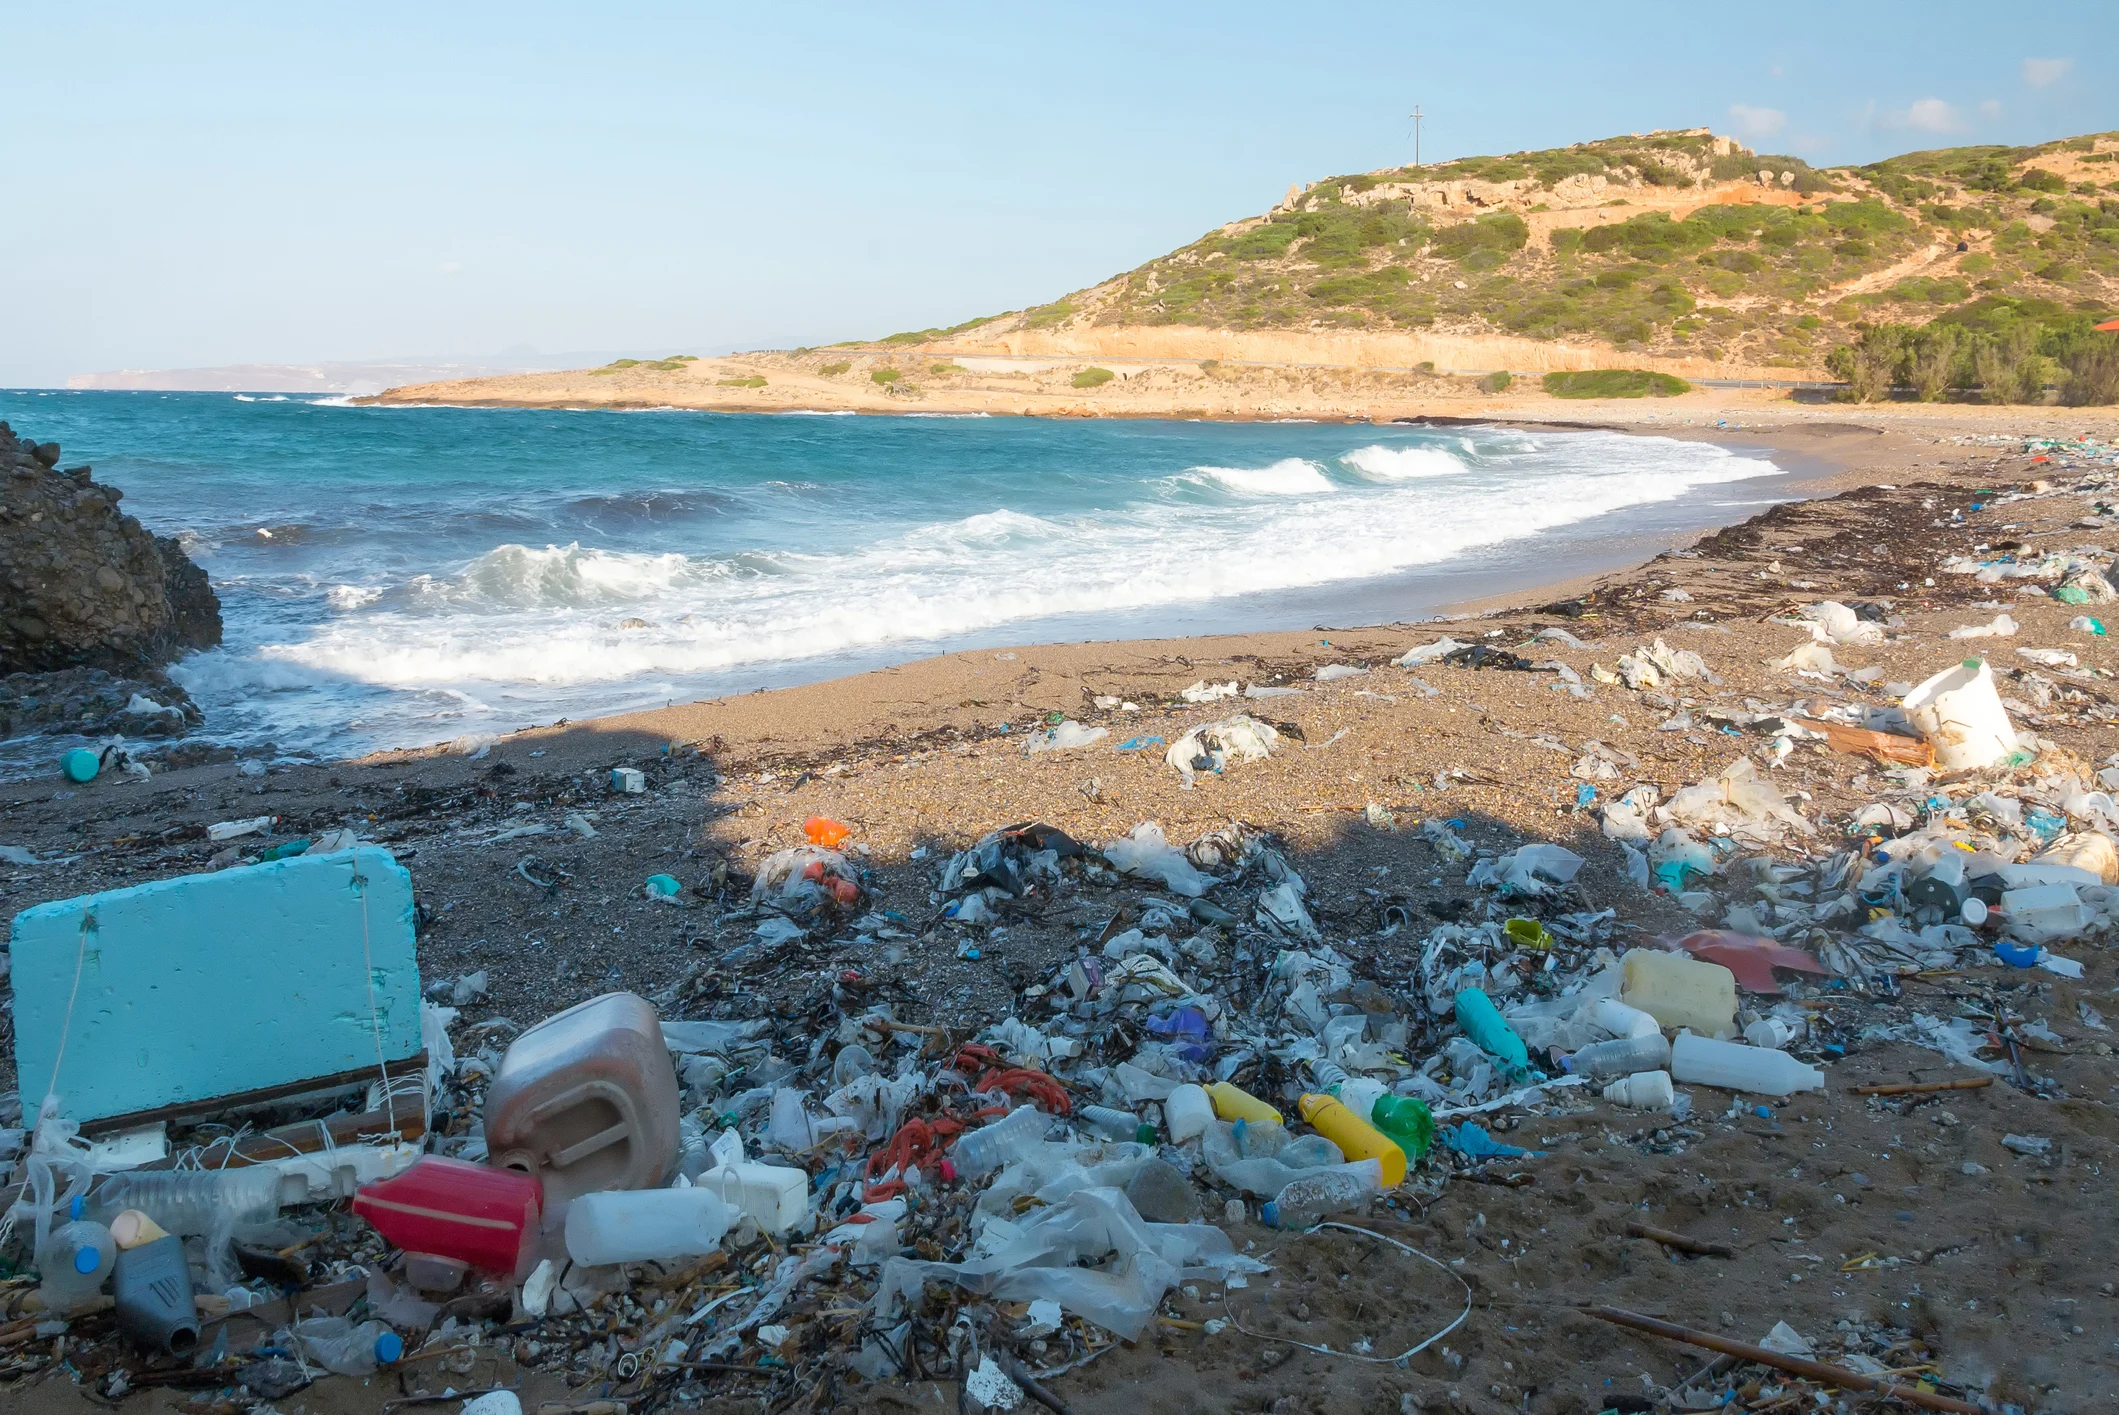 ocean plastic pollution in greece (Nick Brundle Photography. Moment. Getty Images)